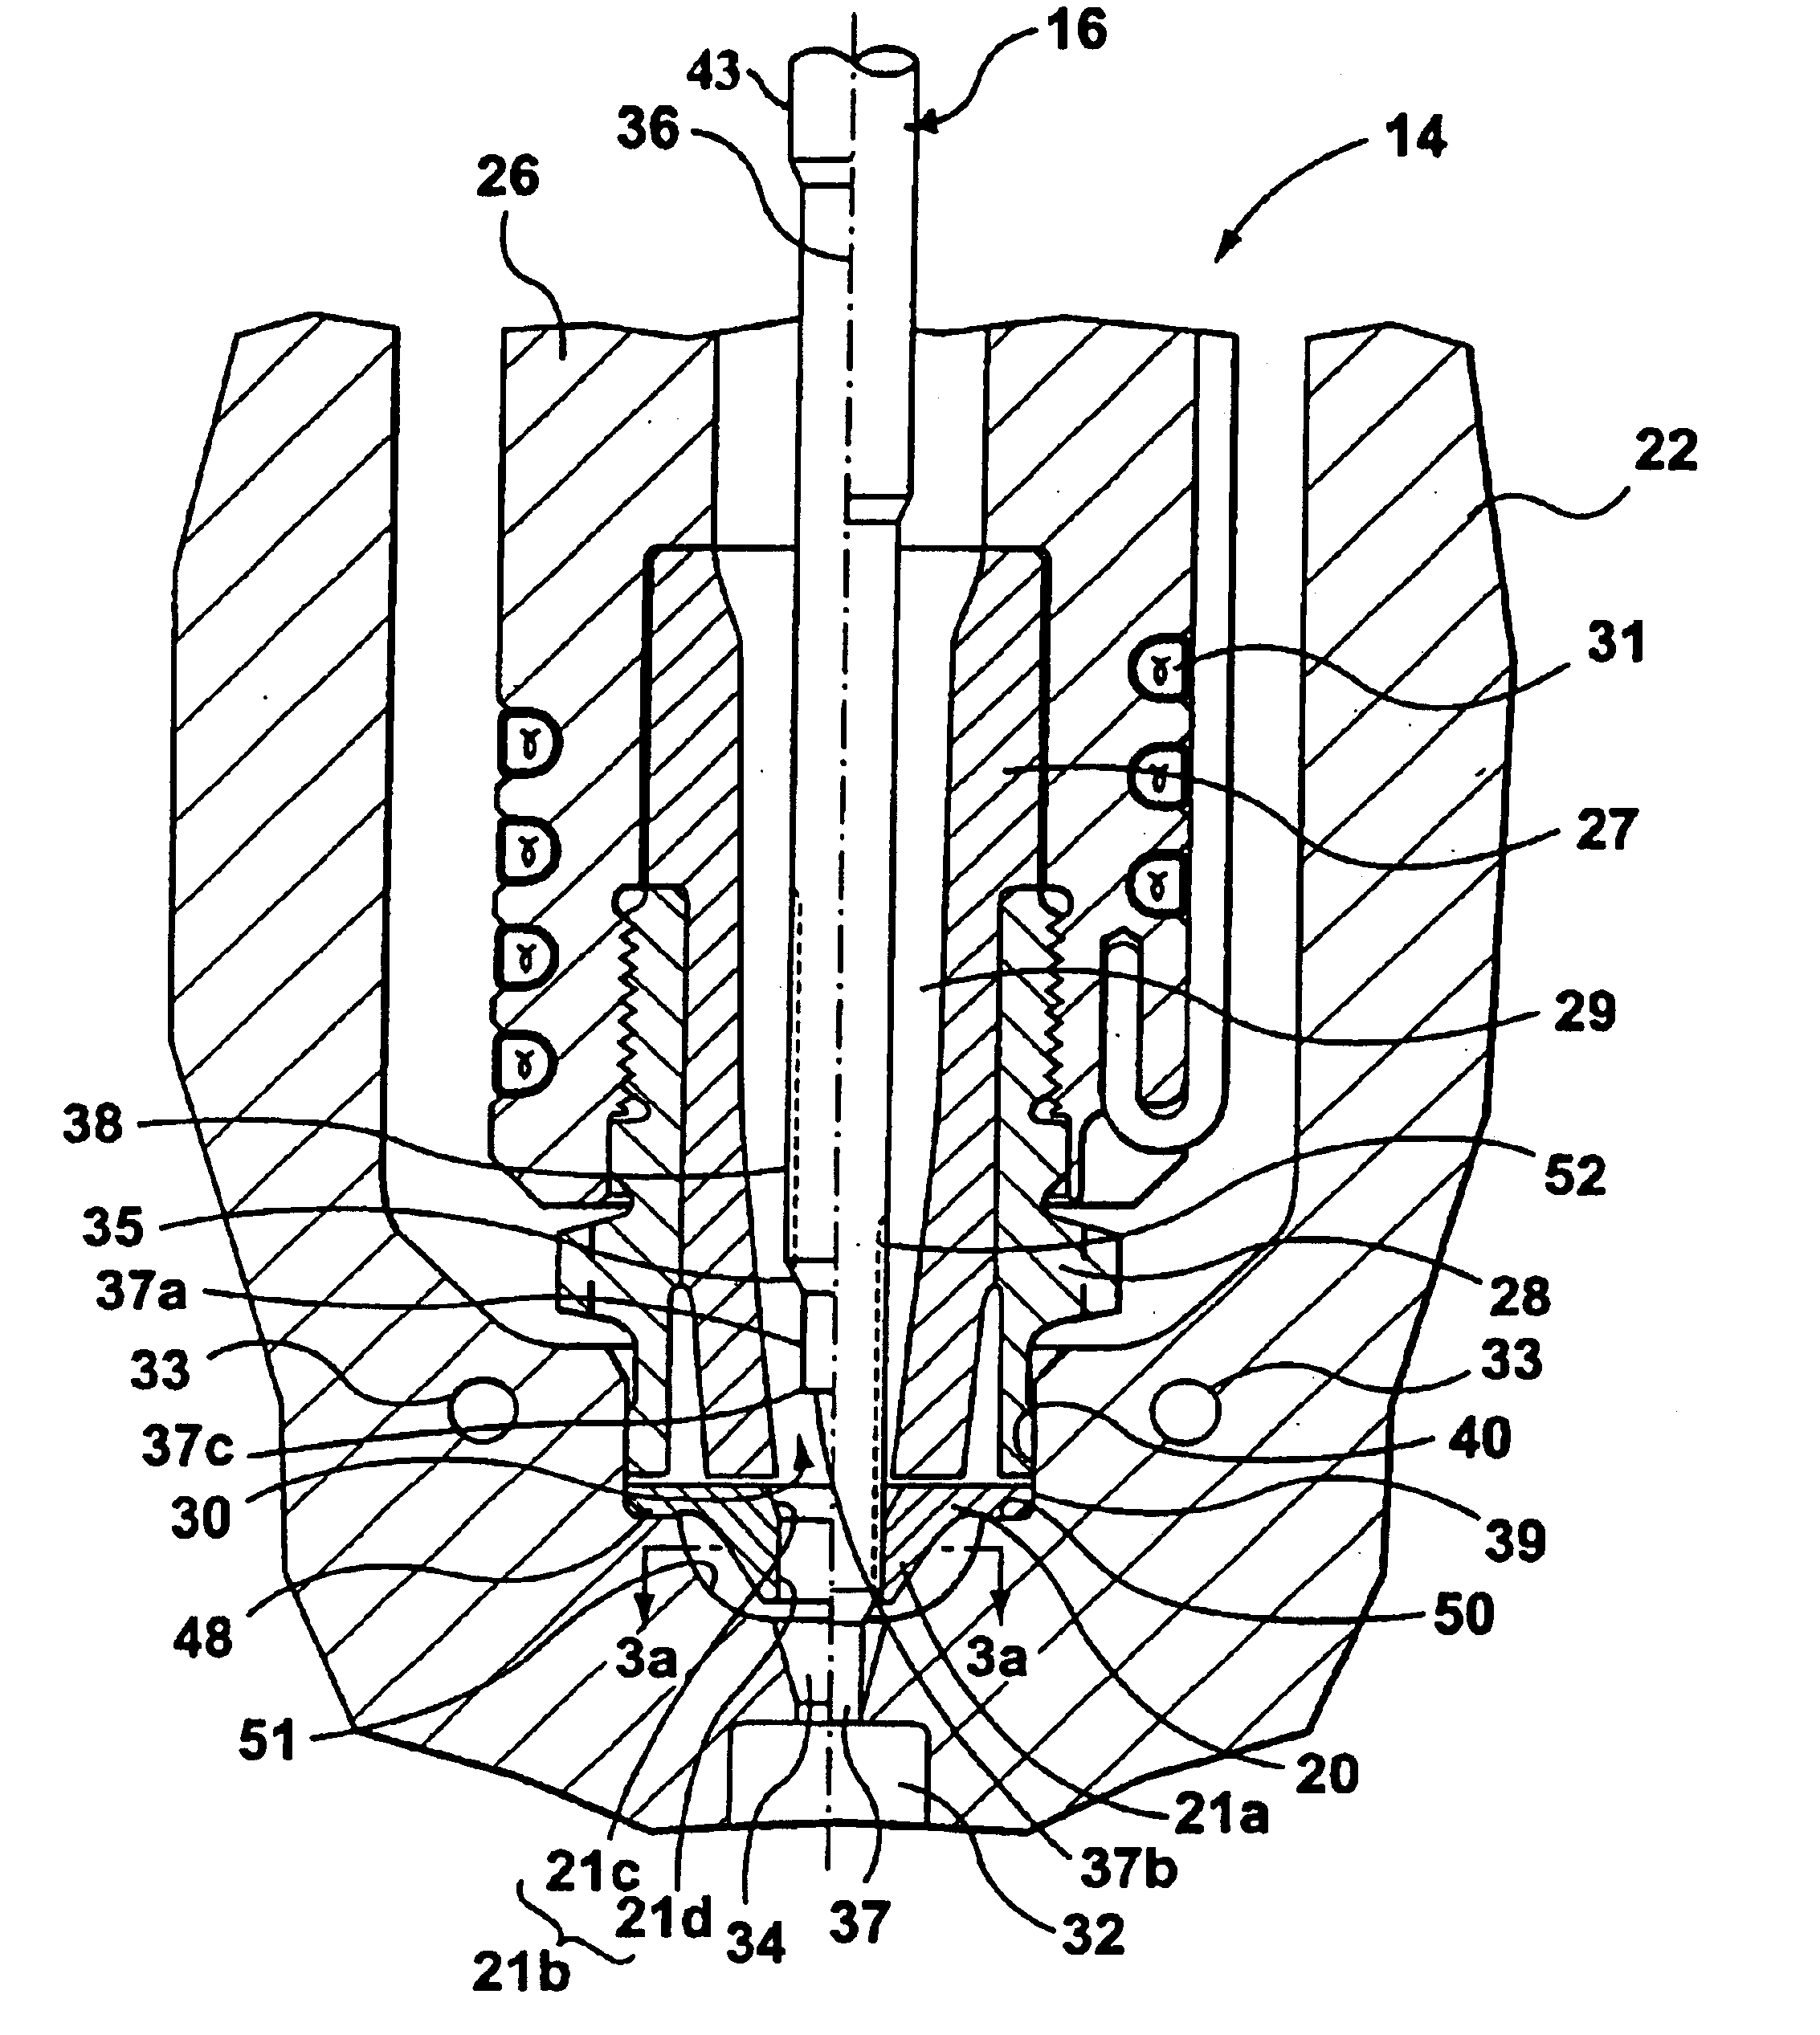 Valve pin guide for a valve-gated nozzle